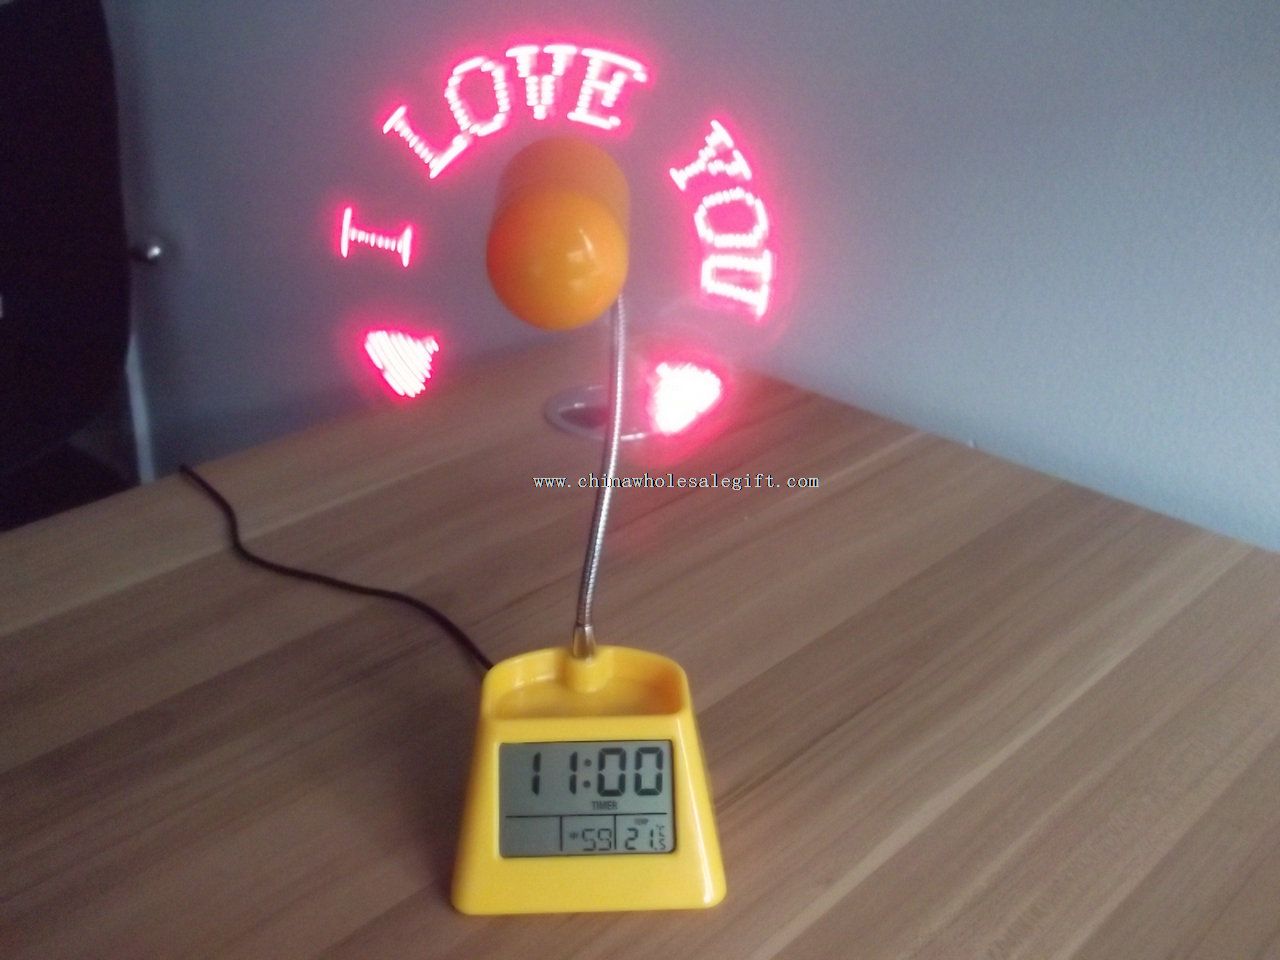 USB Fan with text CLOCK